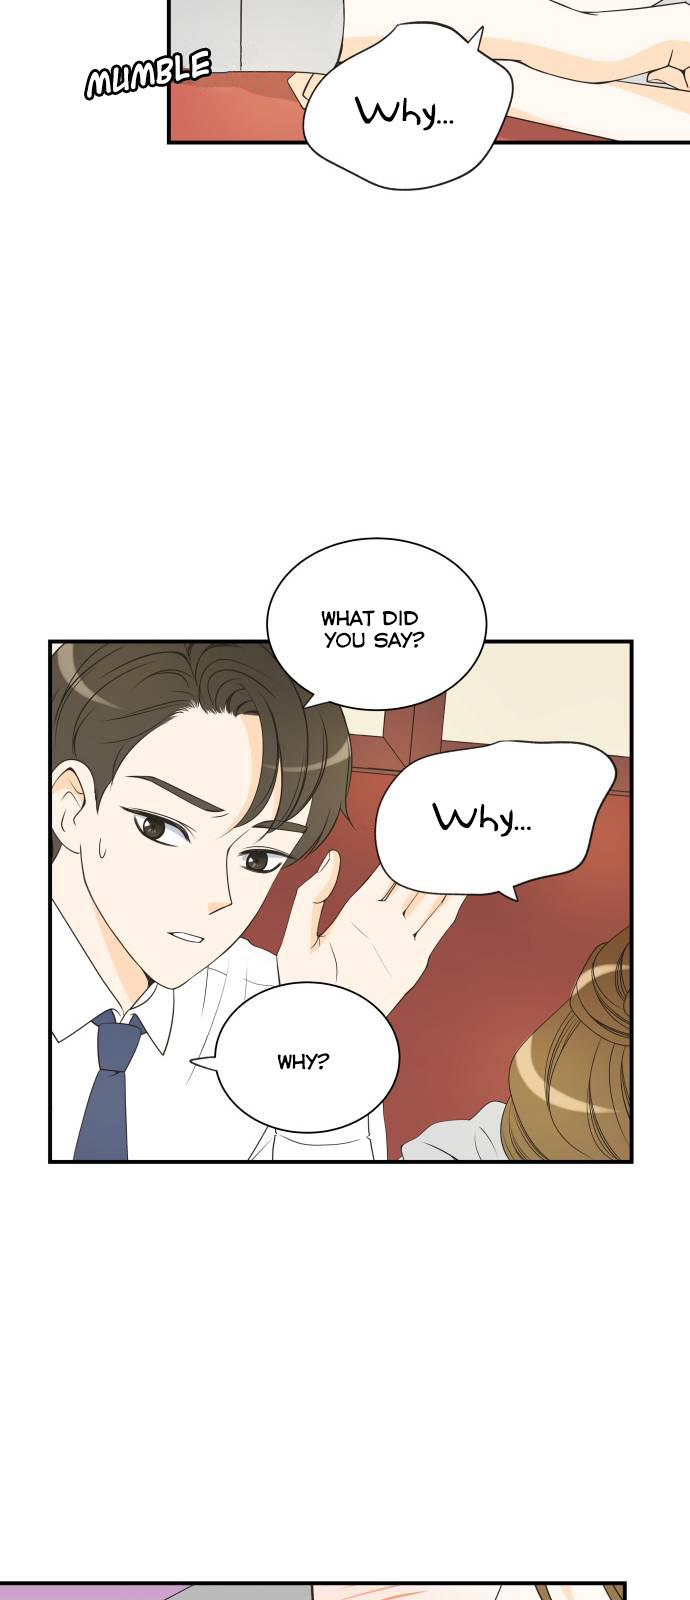 It Is My First Love Vol. 1 Ch. 21